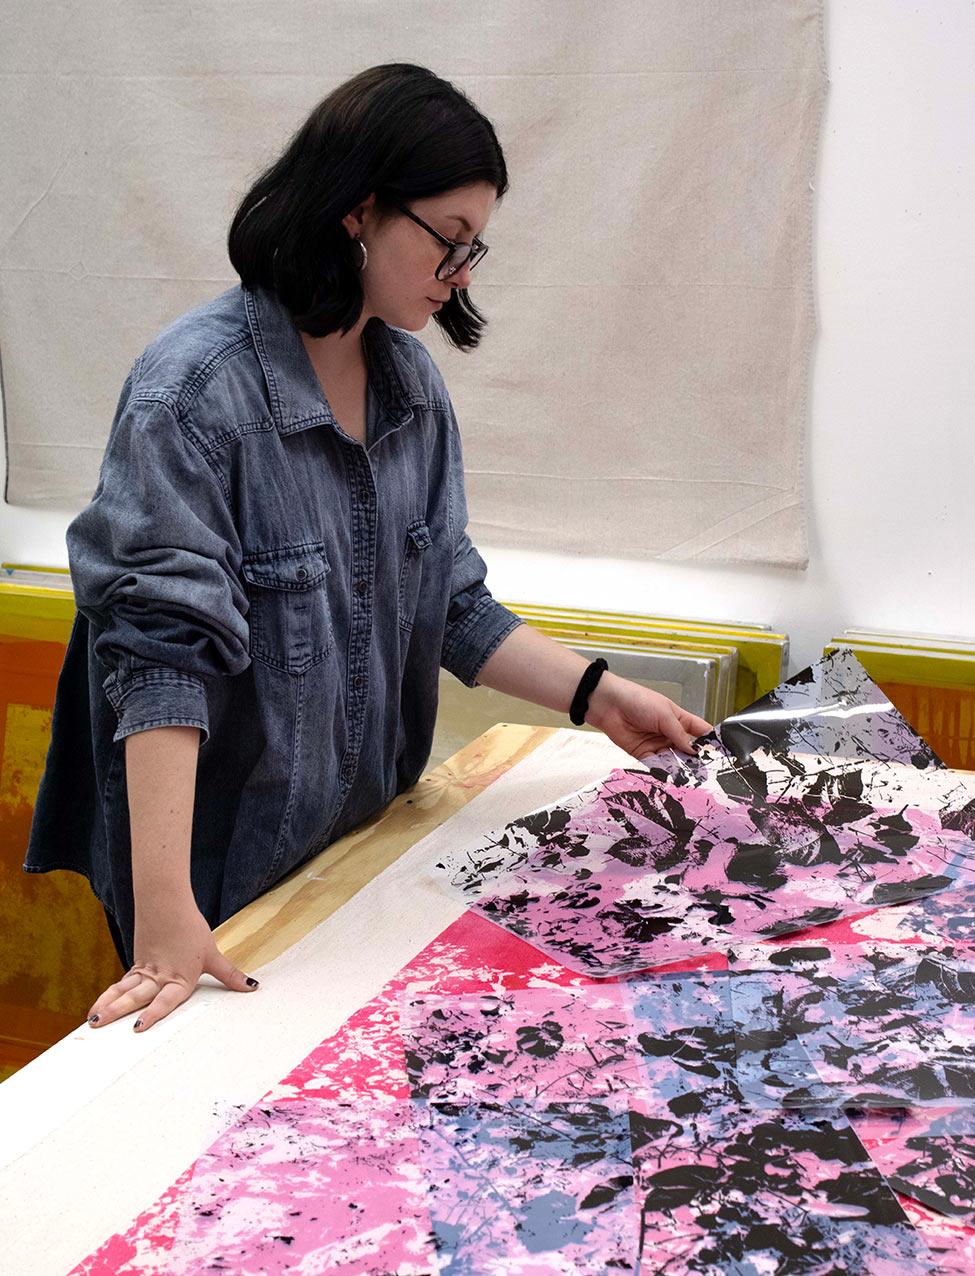 Pace University's Film and Screen Studies student Katie Romanyshyn working on an artwork project made possible by the Amelia A. Gould Undergraduate Research Assistantship